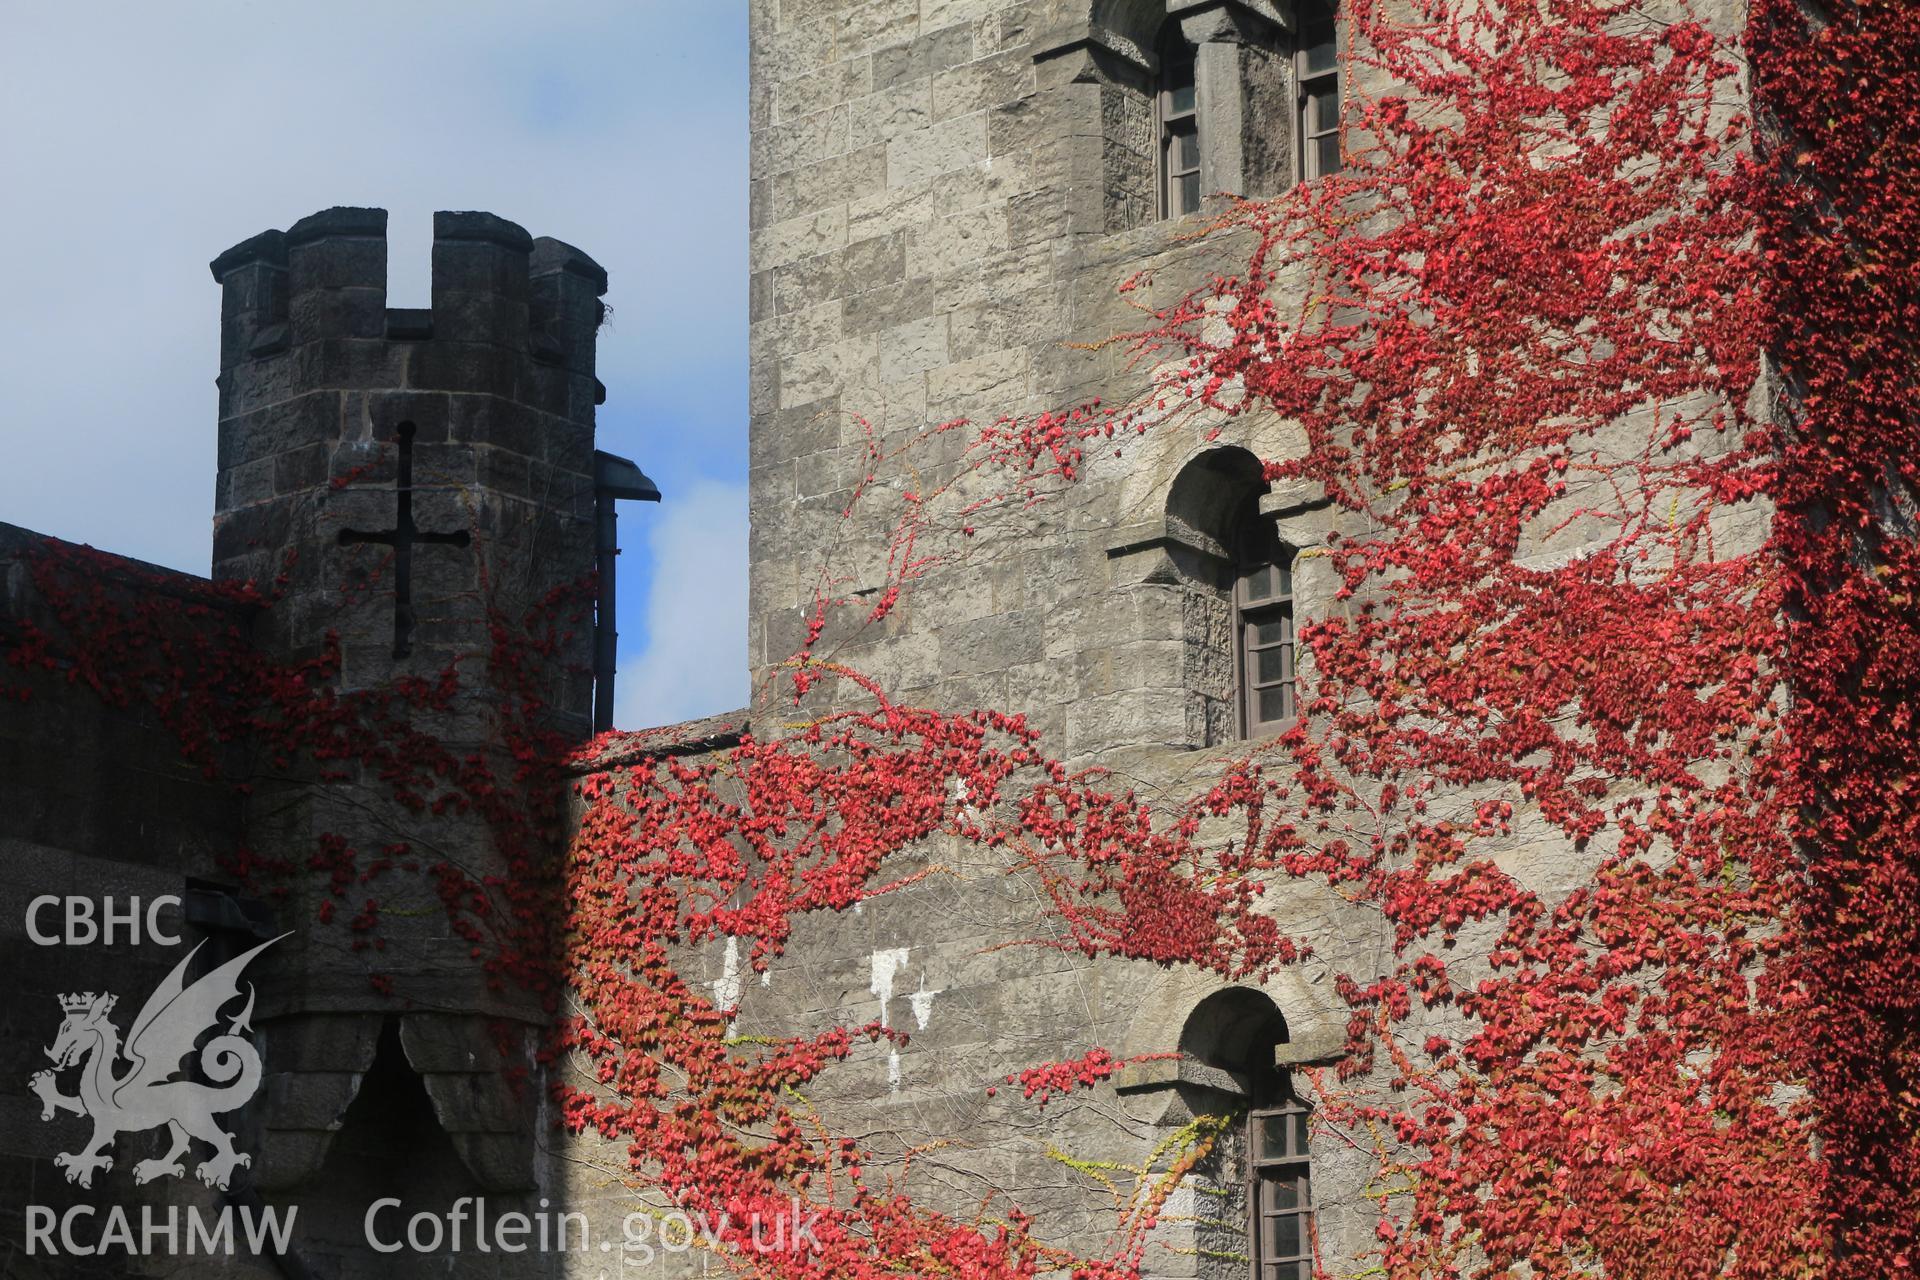 Photographic survey of Penrhyn Castle, Bangor. East front, detail of tower.